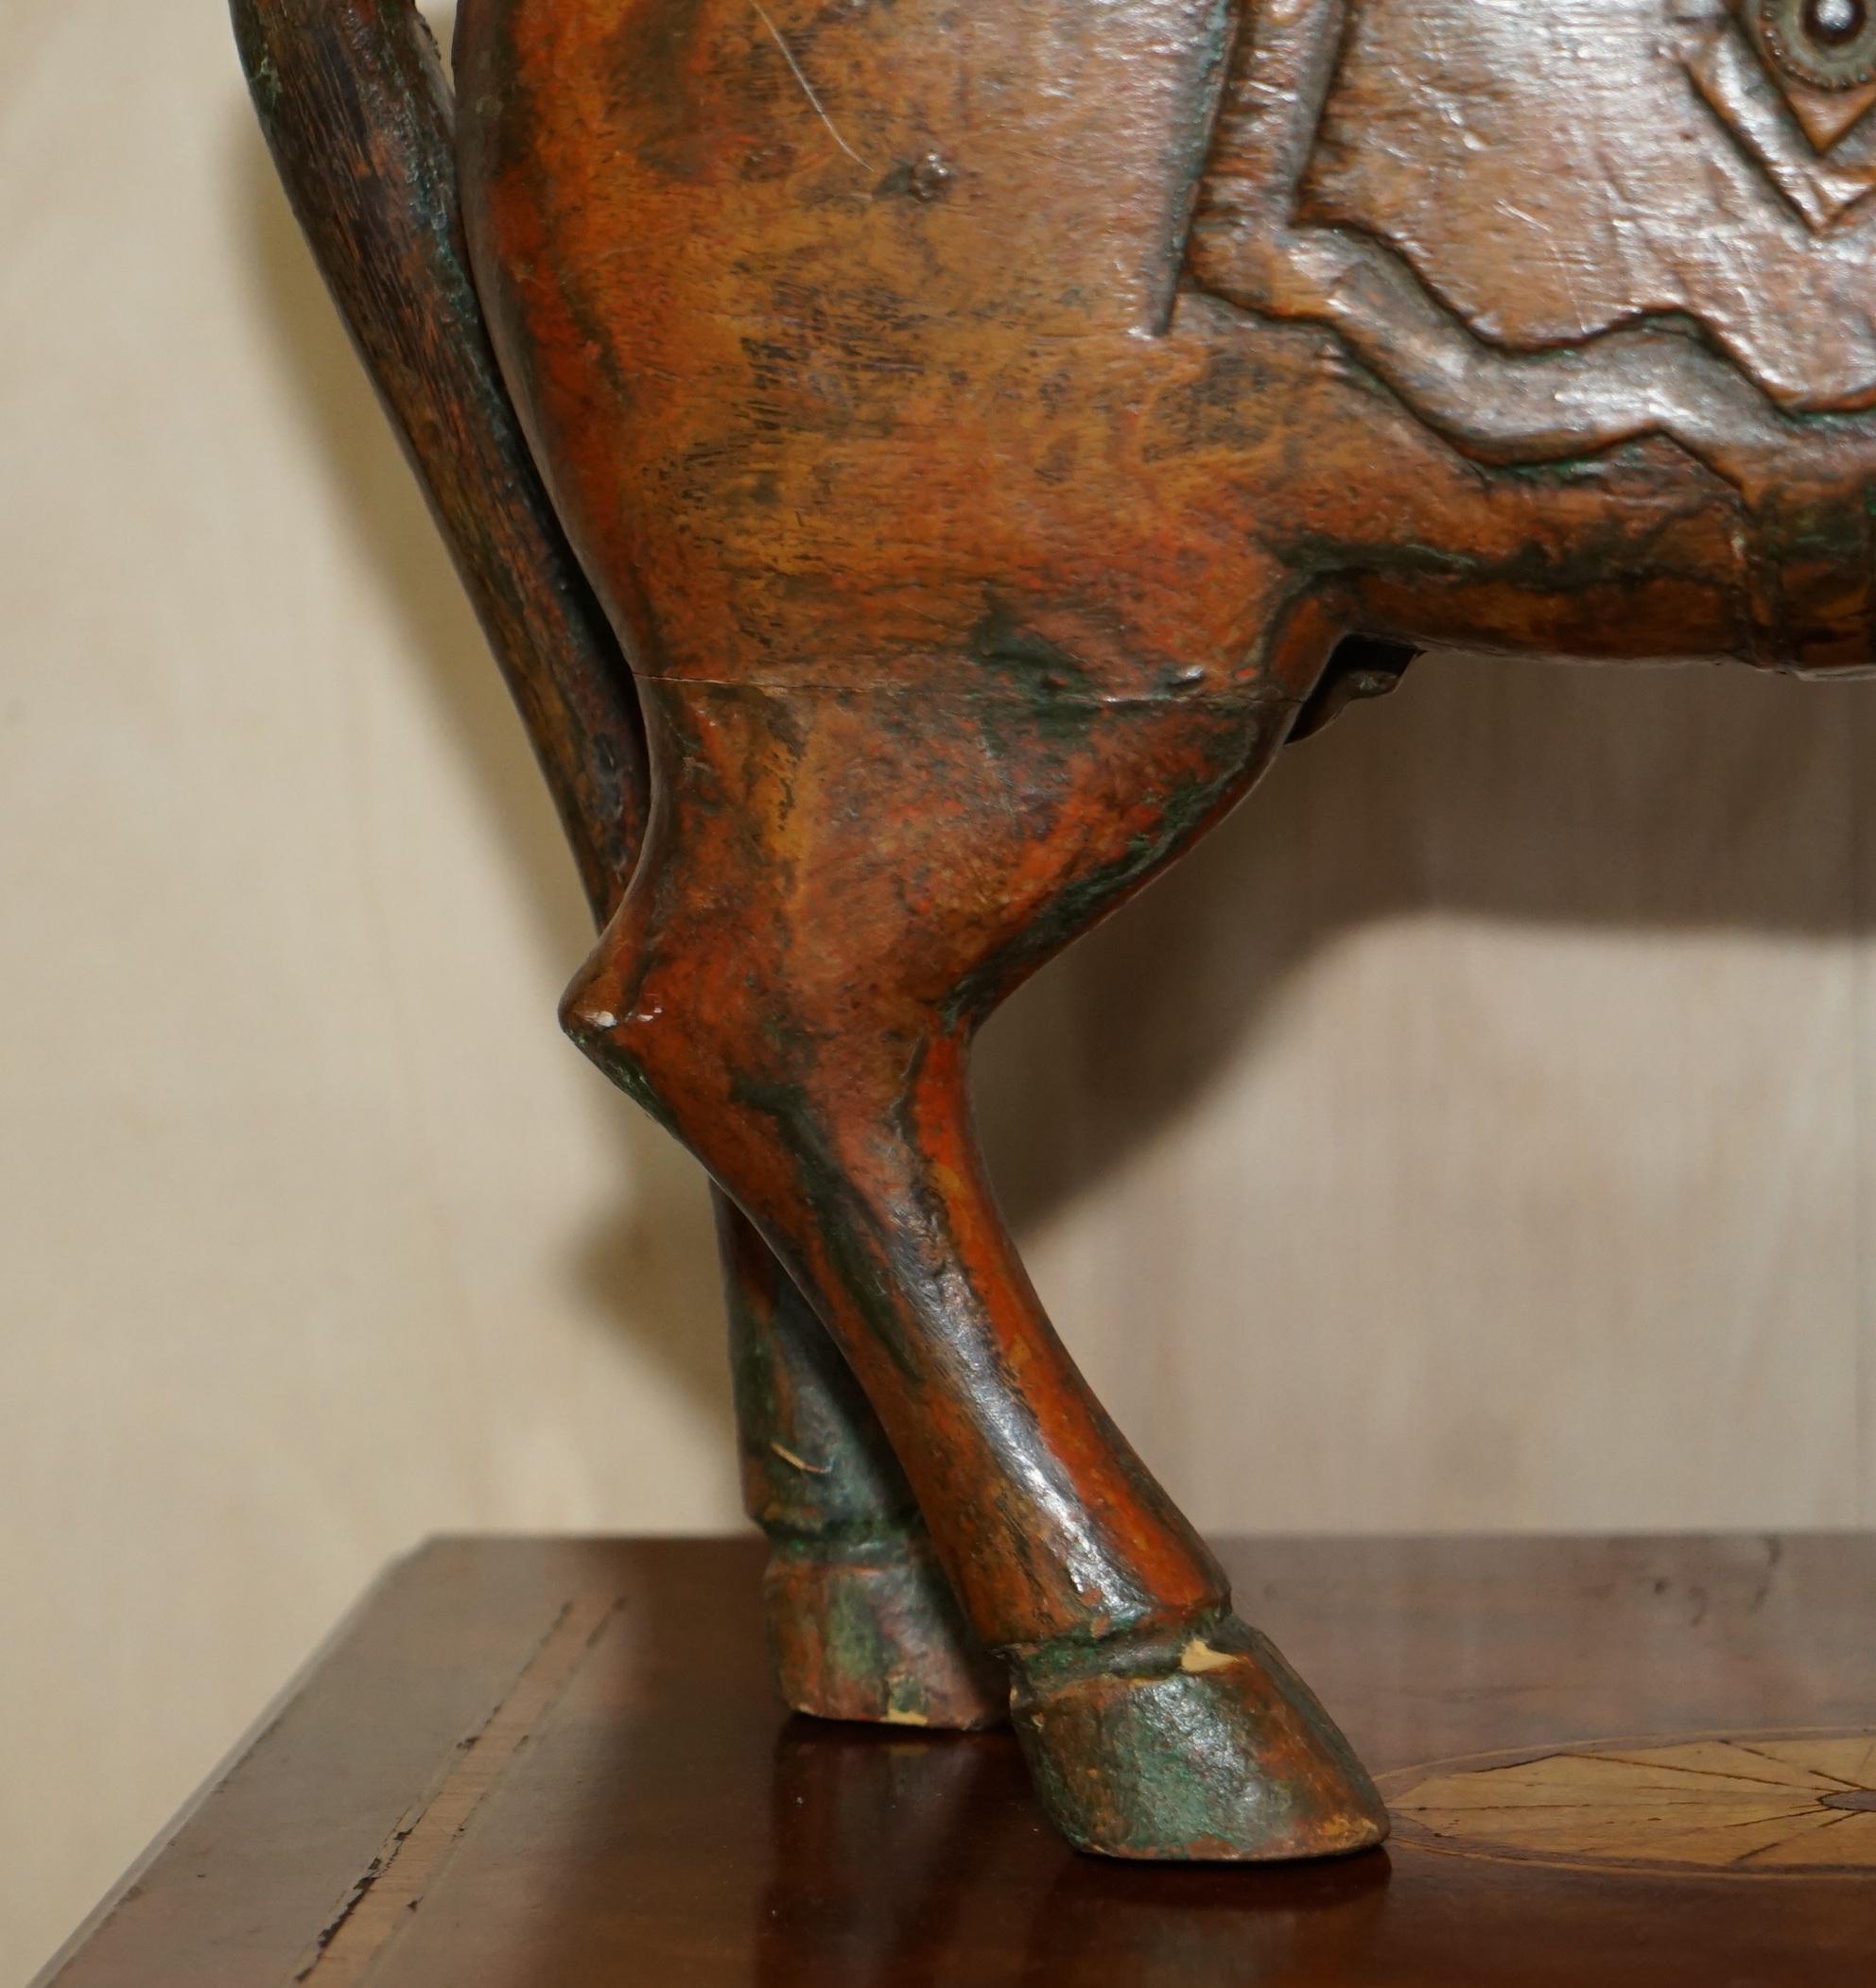 Oak Decorative Antique Indian Hand Carved & Painted Wooden Statue of a Lovely Horse